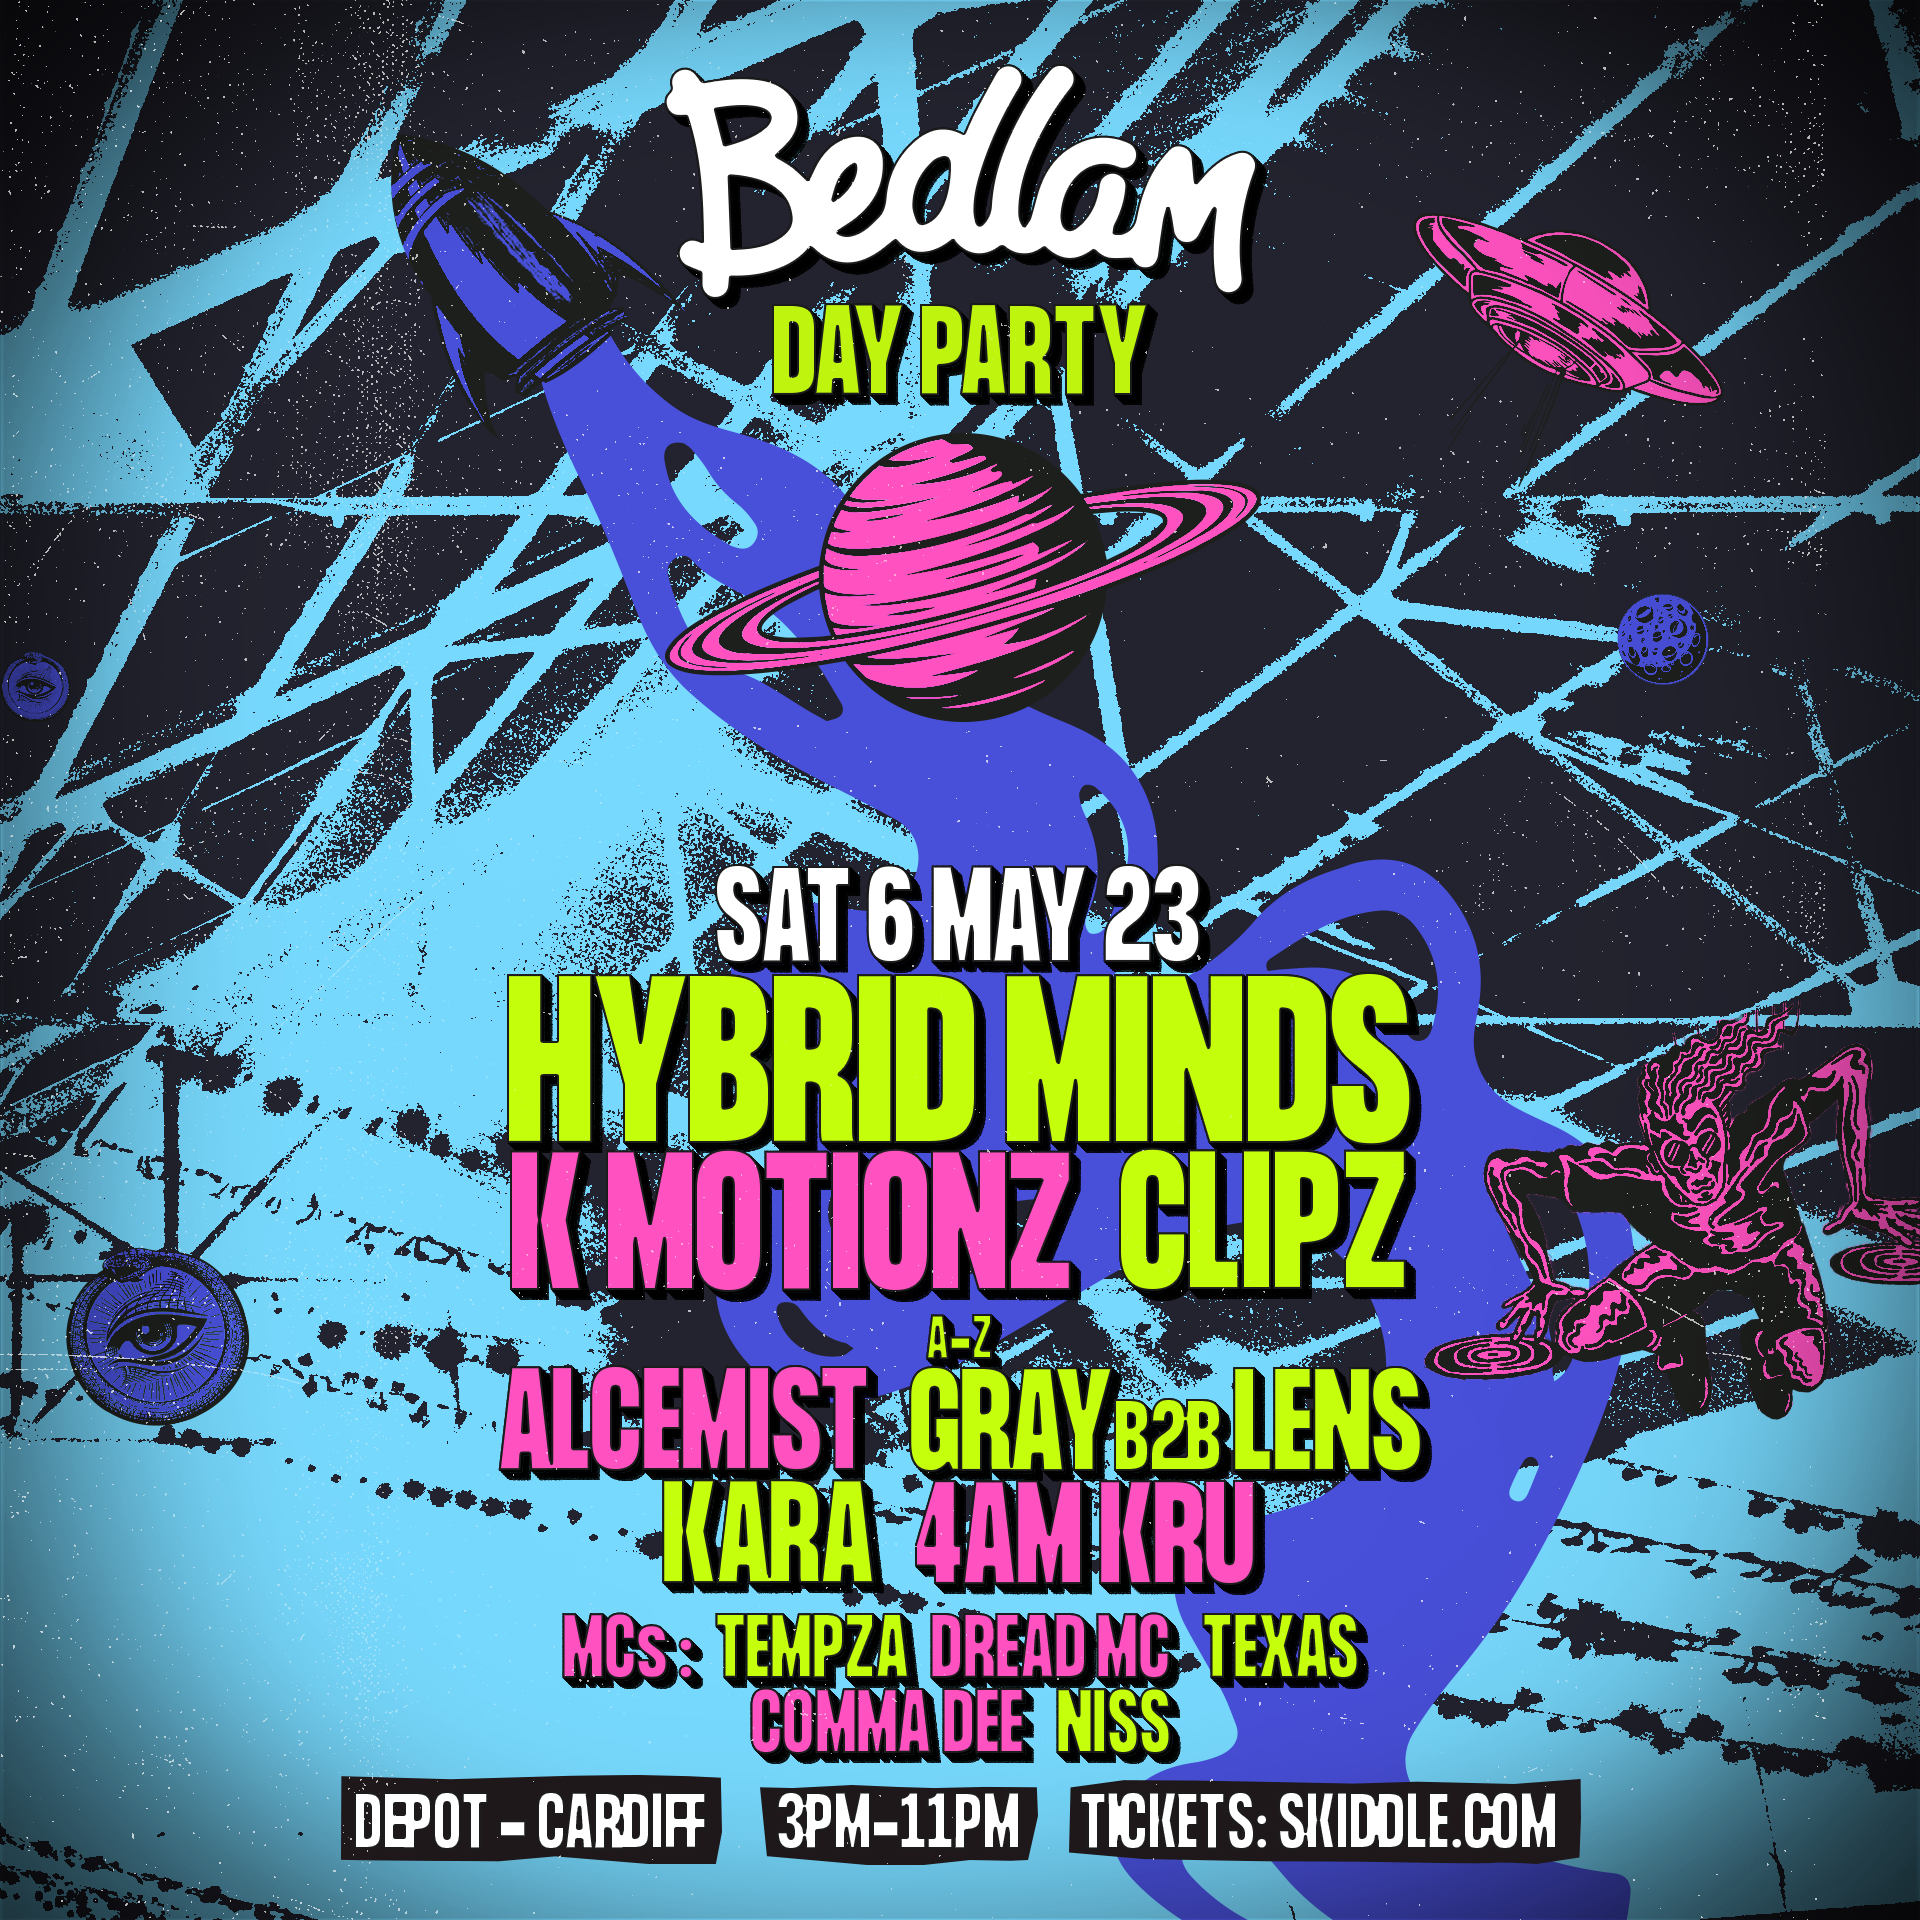 Bedlam: Day Party - フライヤー表